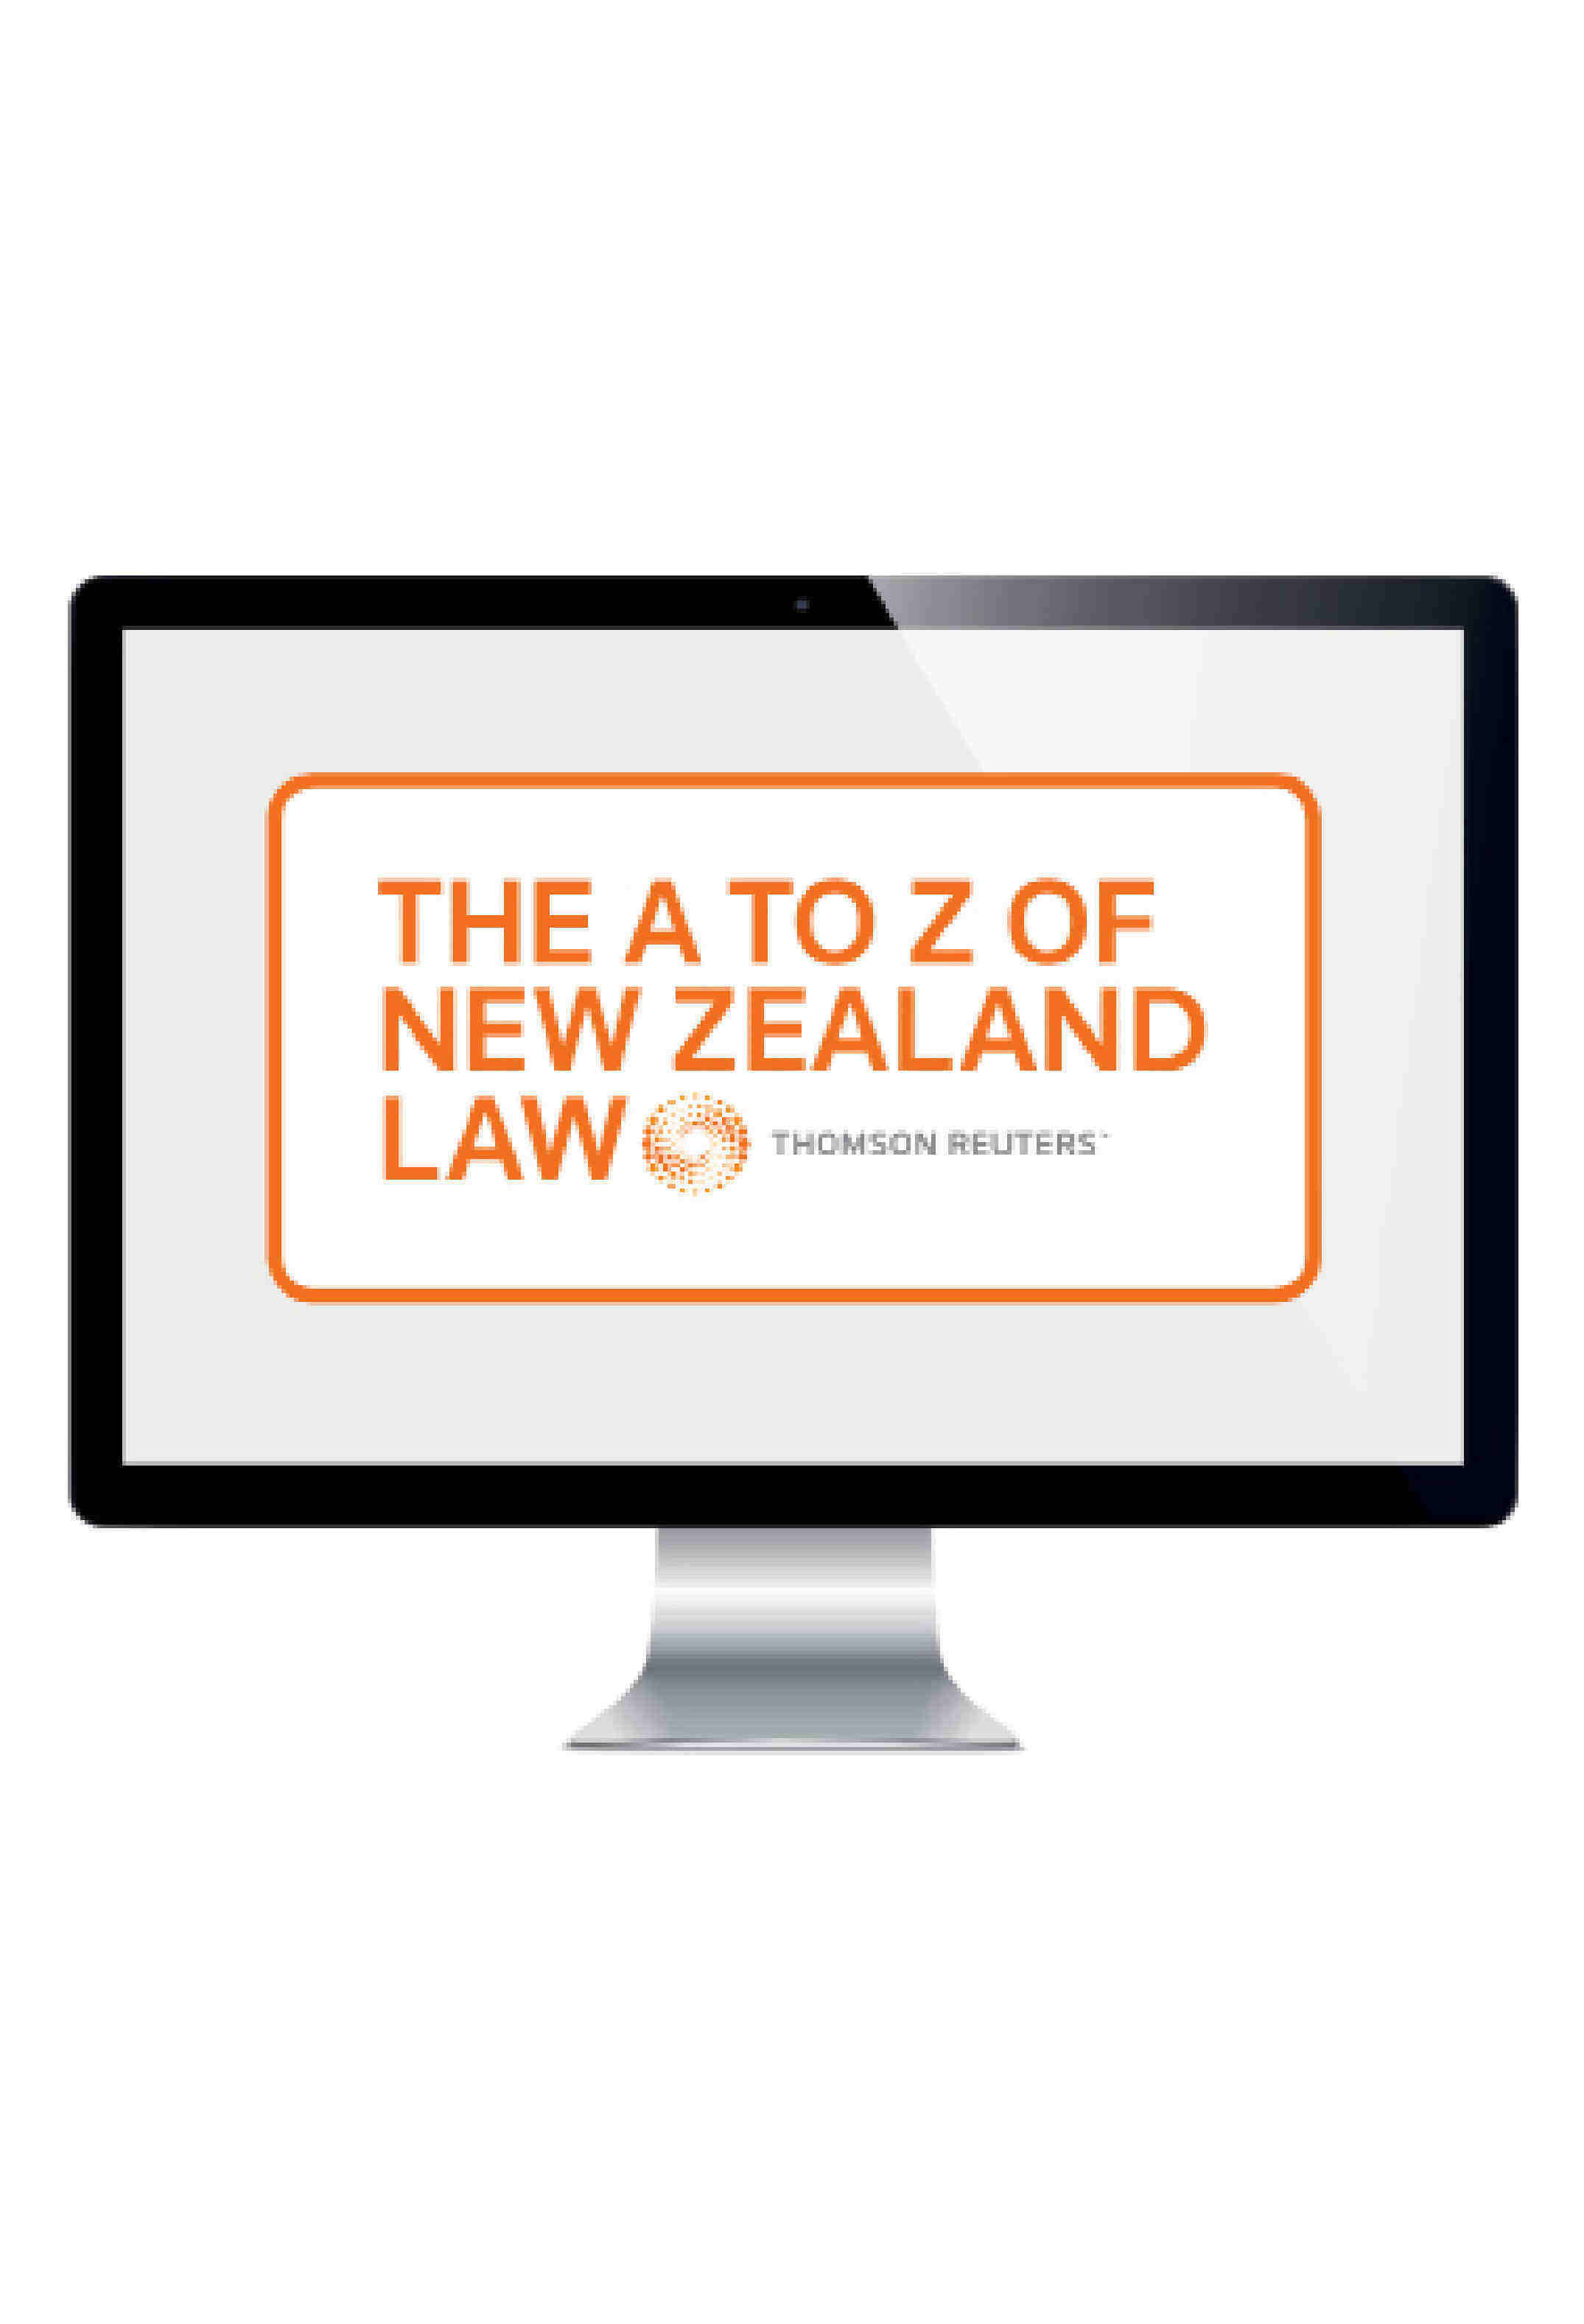 A to Z of NZ Law - Commercial Law, E-Commerce - Westlaw NZ